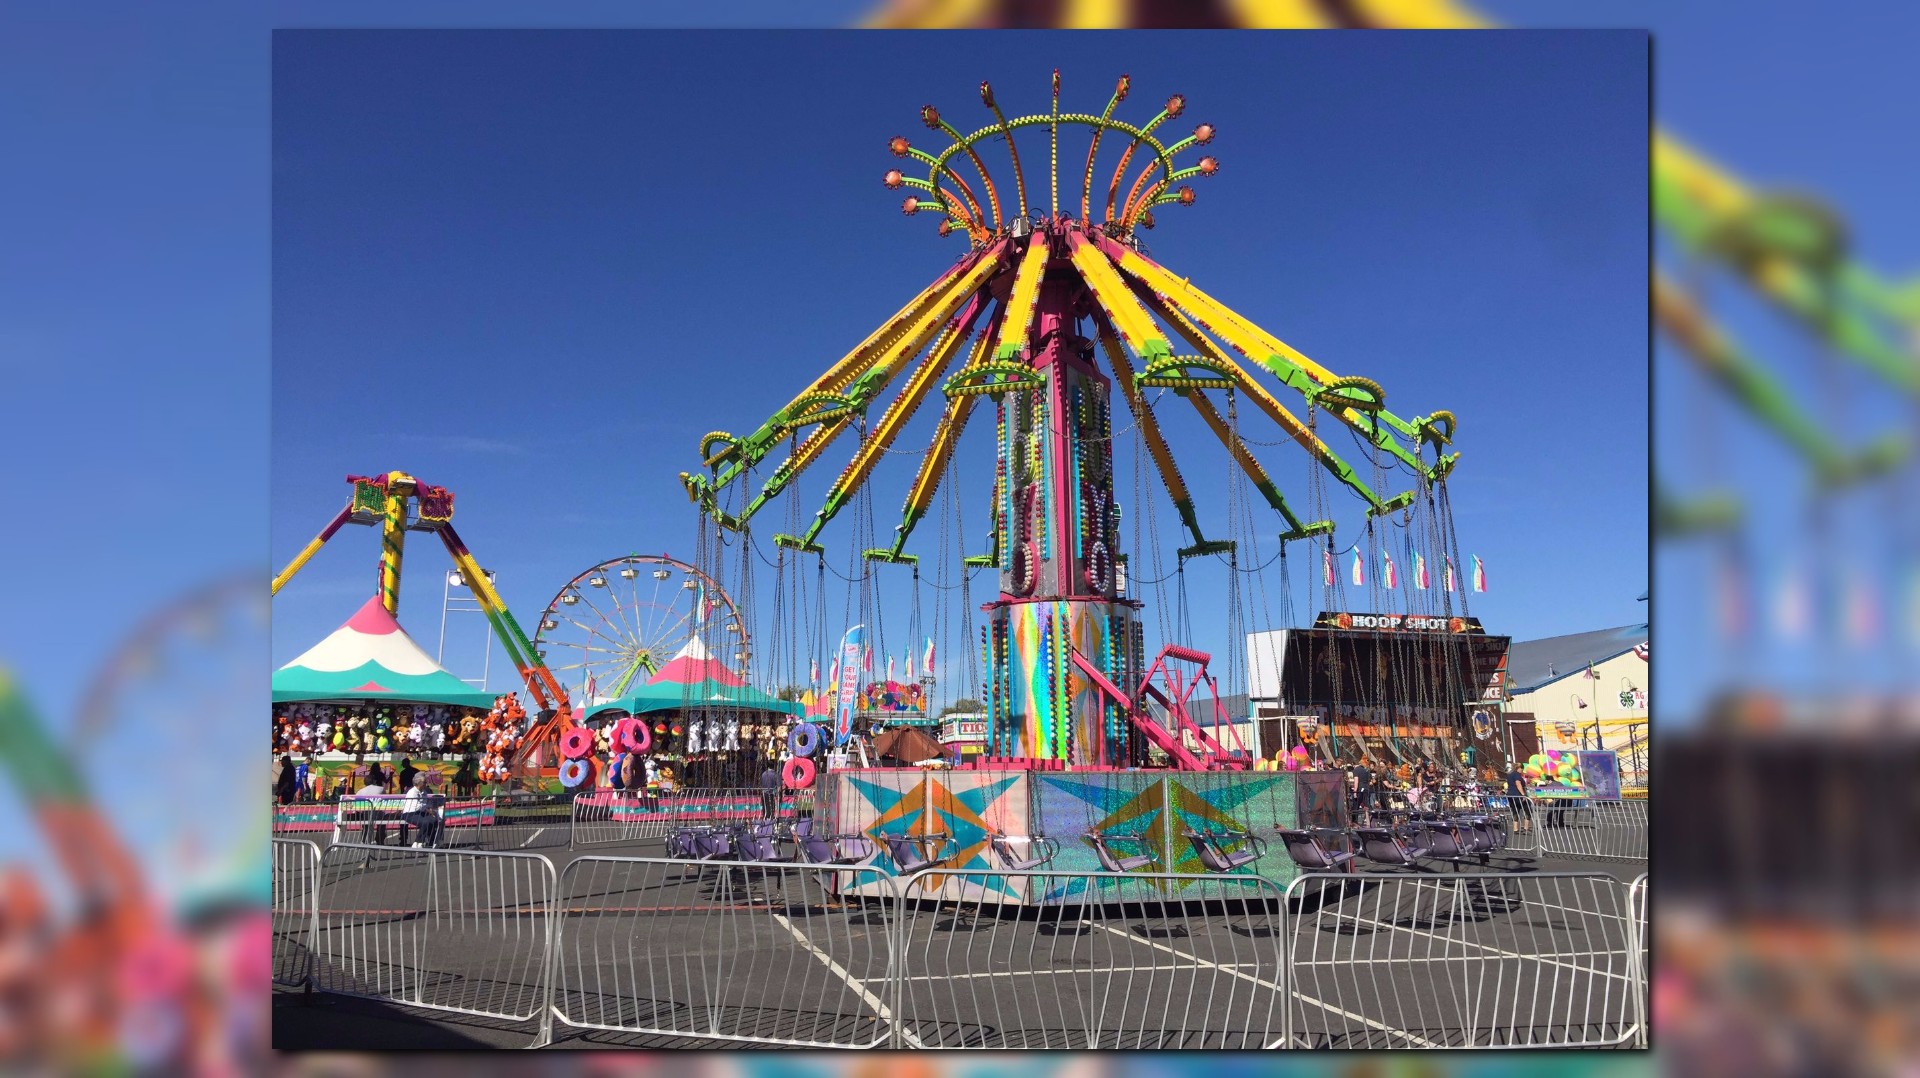 Exciting new attractions at the Spokane Interstate Fair